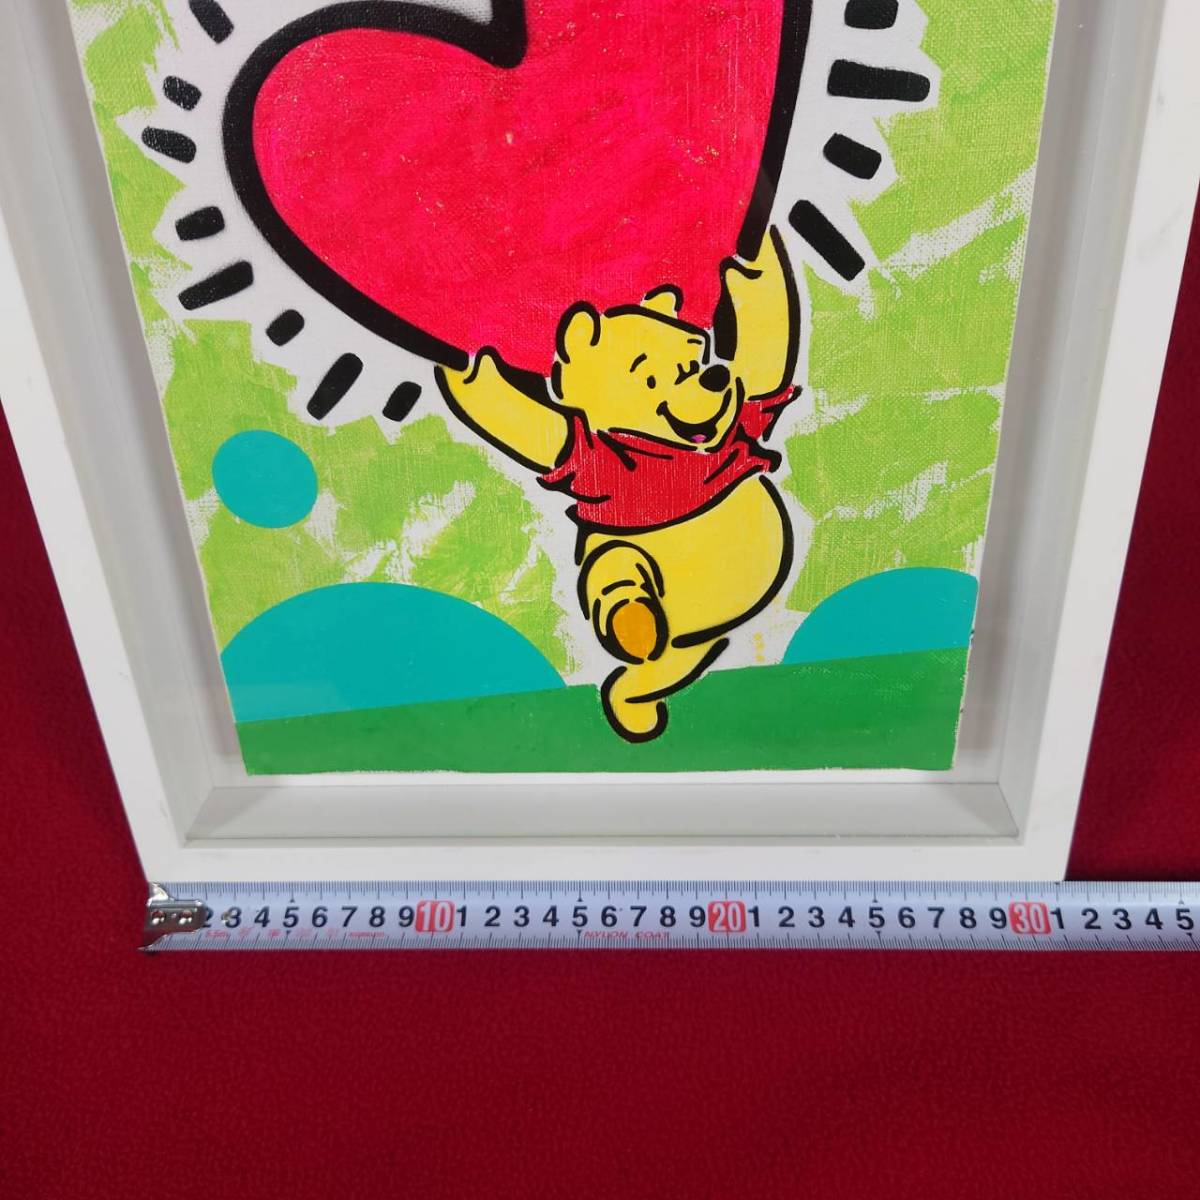  low to one LOOTone Kasama history . picture frame Pooh&Hart-2 2019 Pooh graph .ti Street art arch -stroke present-day fine art modern times author 